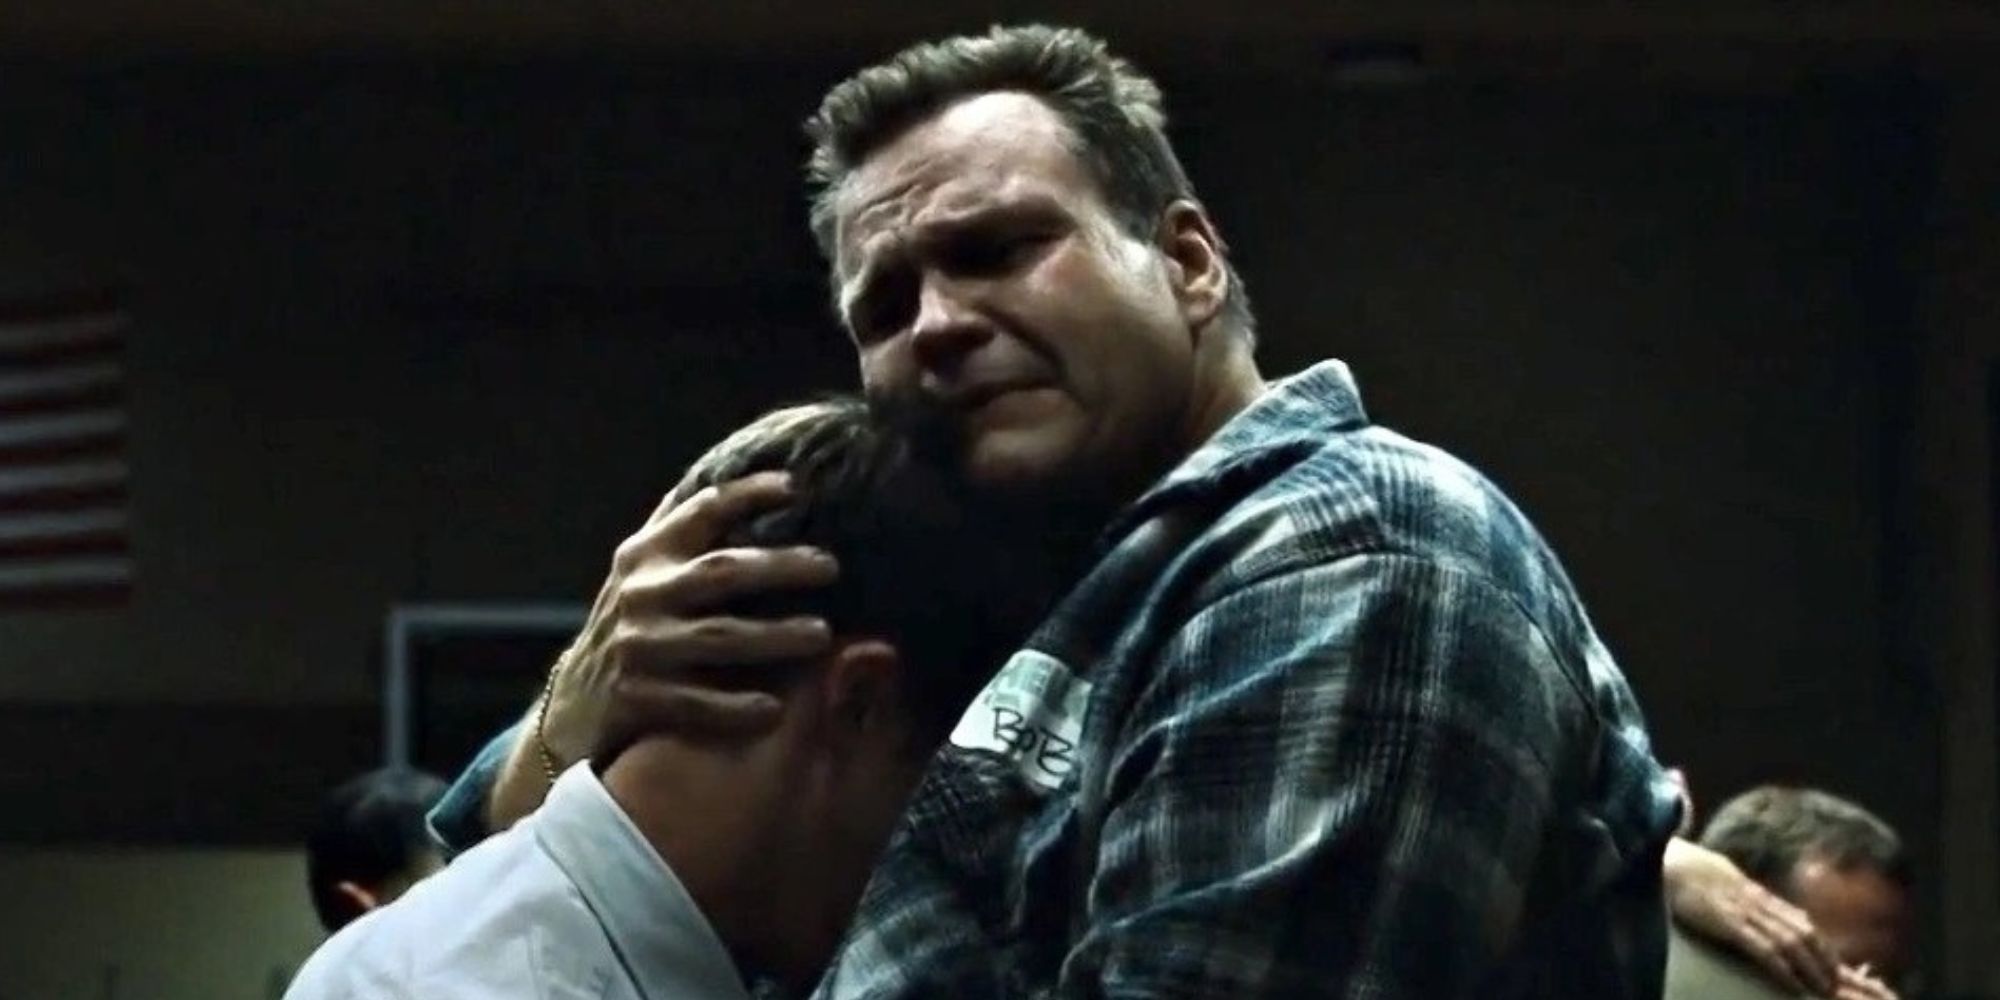 Edward Norton and Meat Loaf embracing in a scene in 'Fight Club'